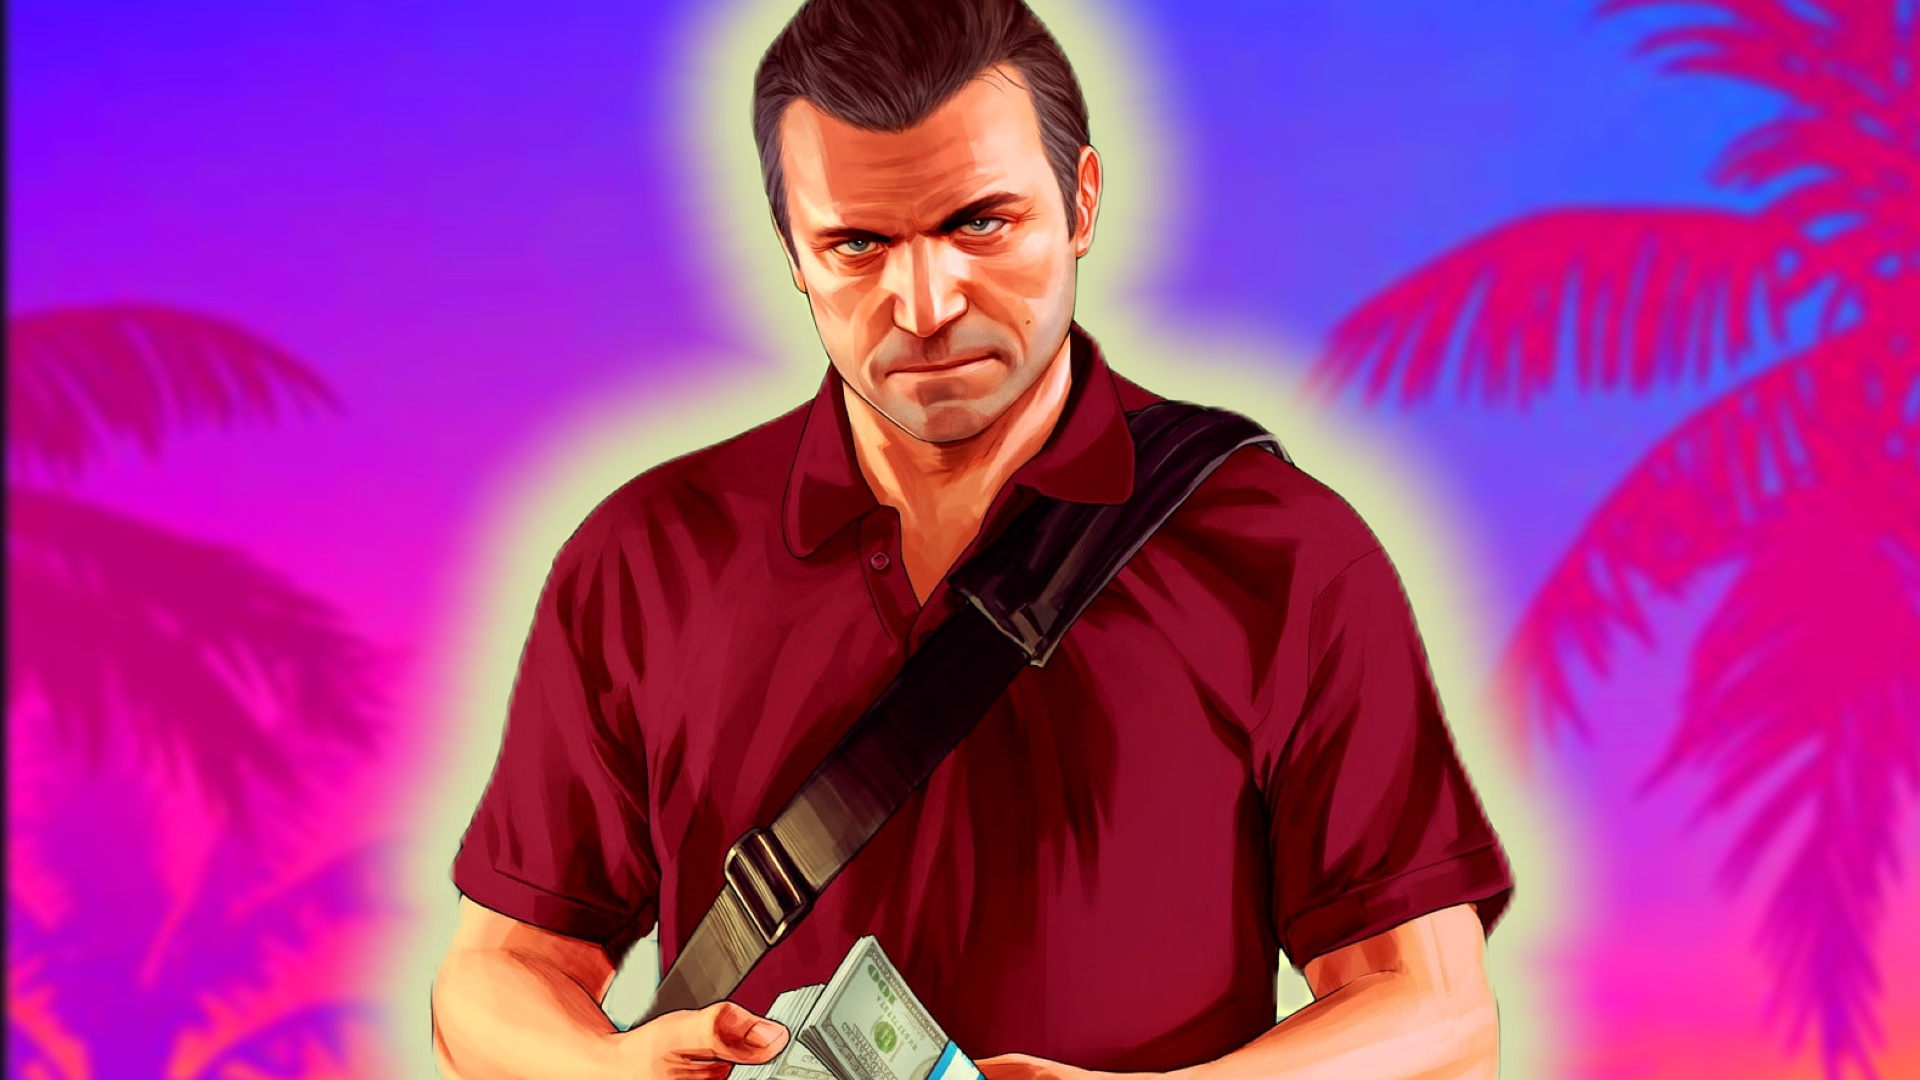 New GTA 6 trailer set to arrive just before The Game Awards next week